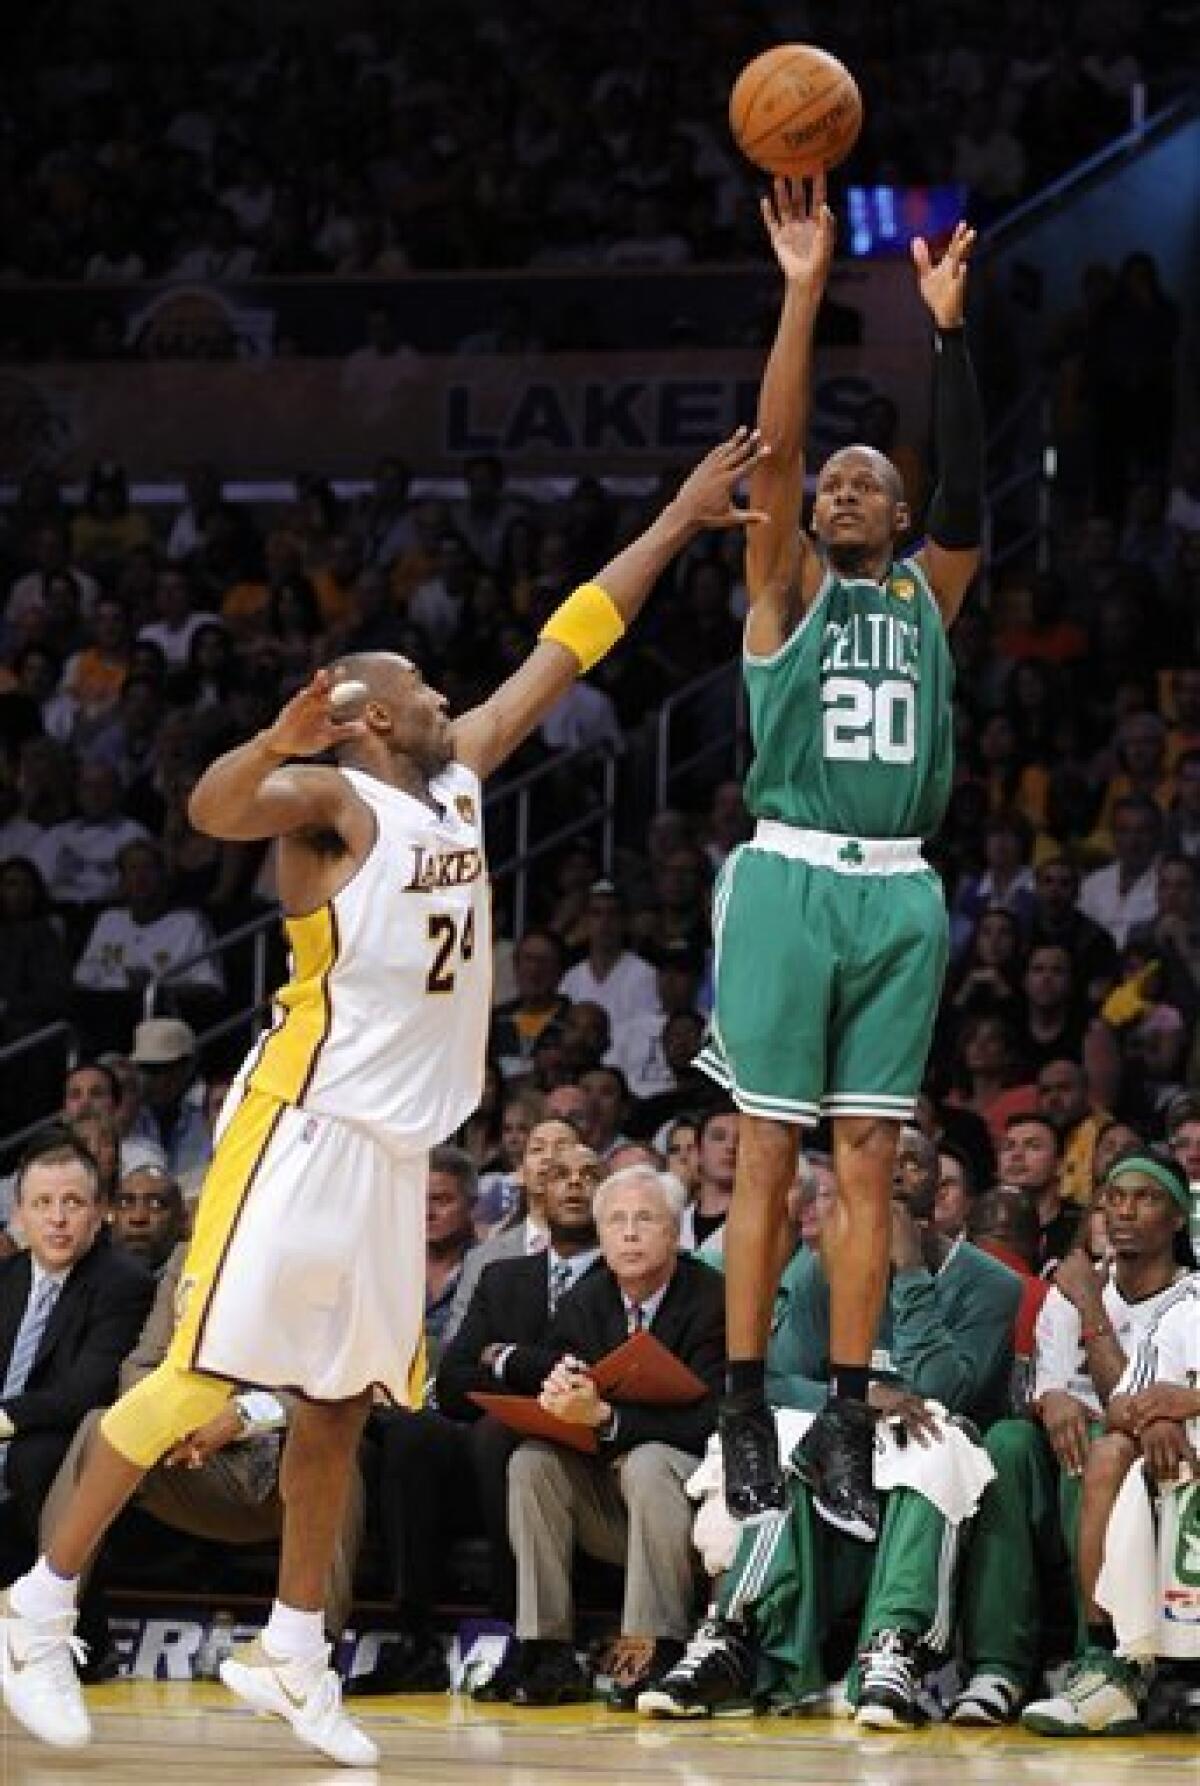 A reminder that Paul Pierce was at his best when the stakes were